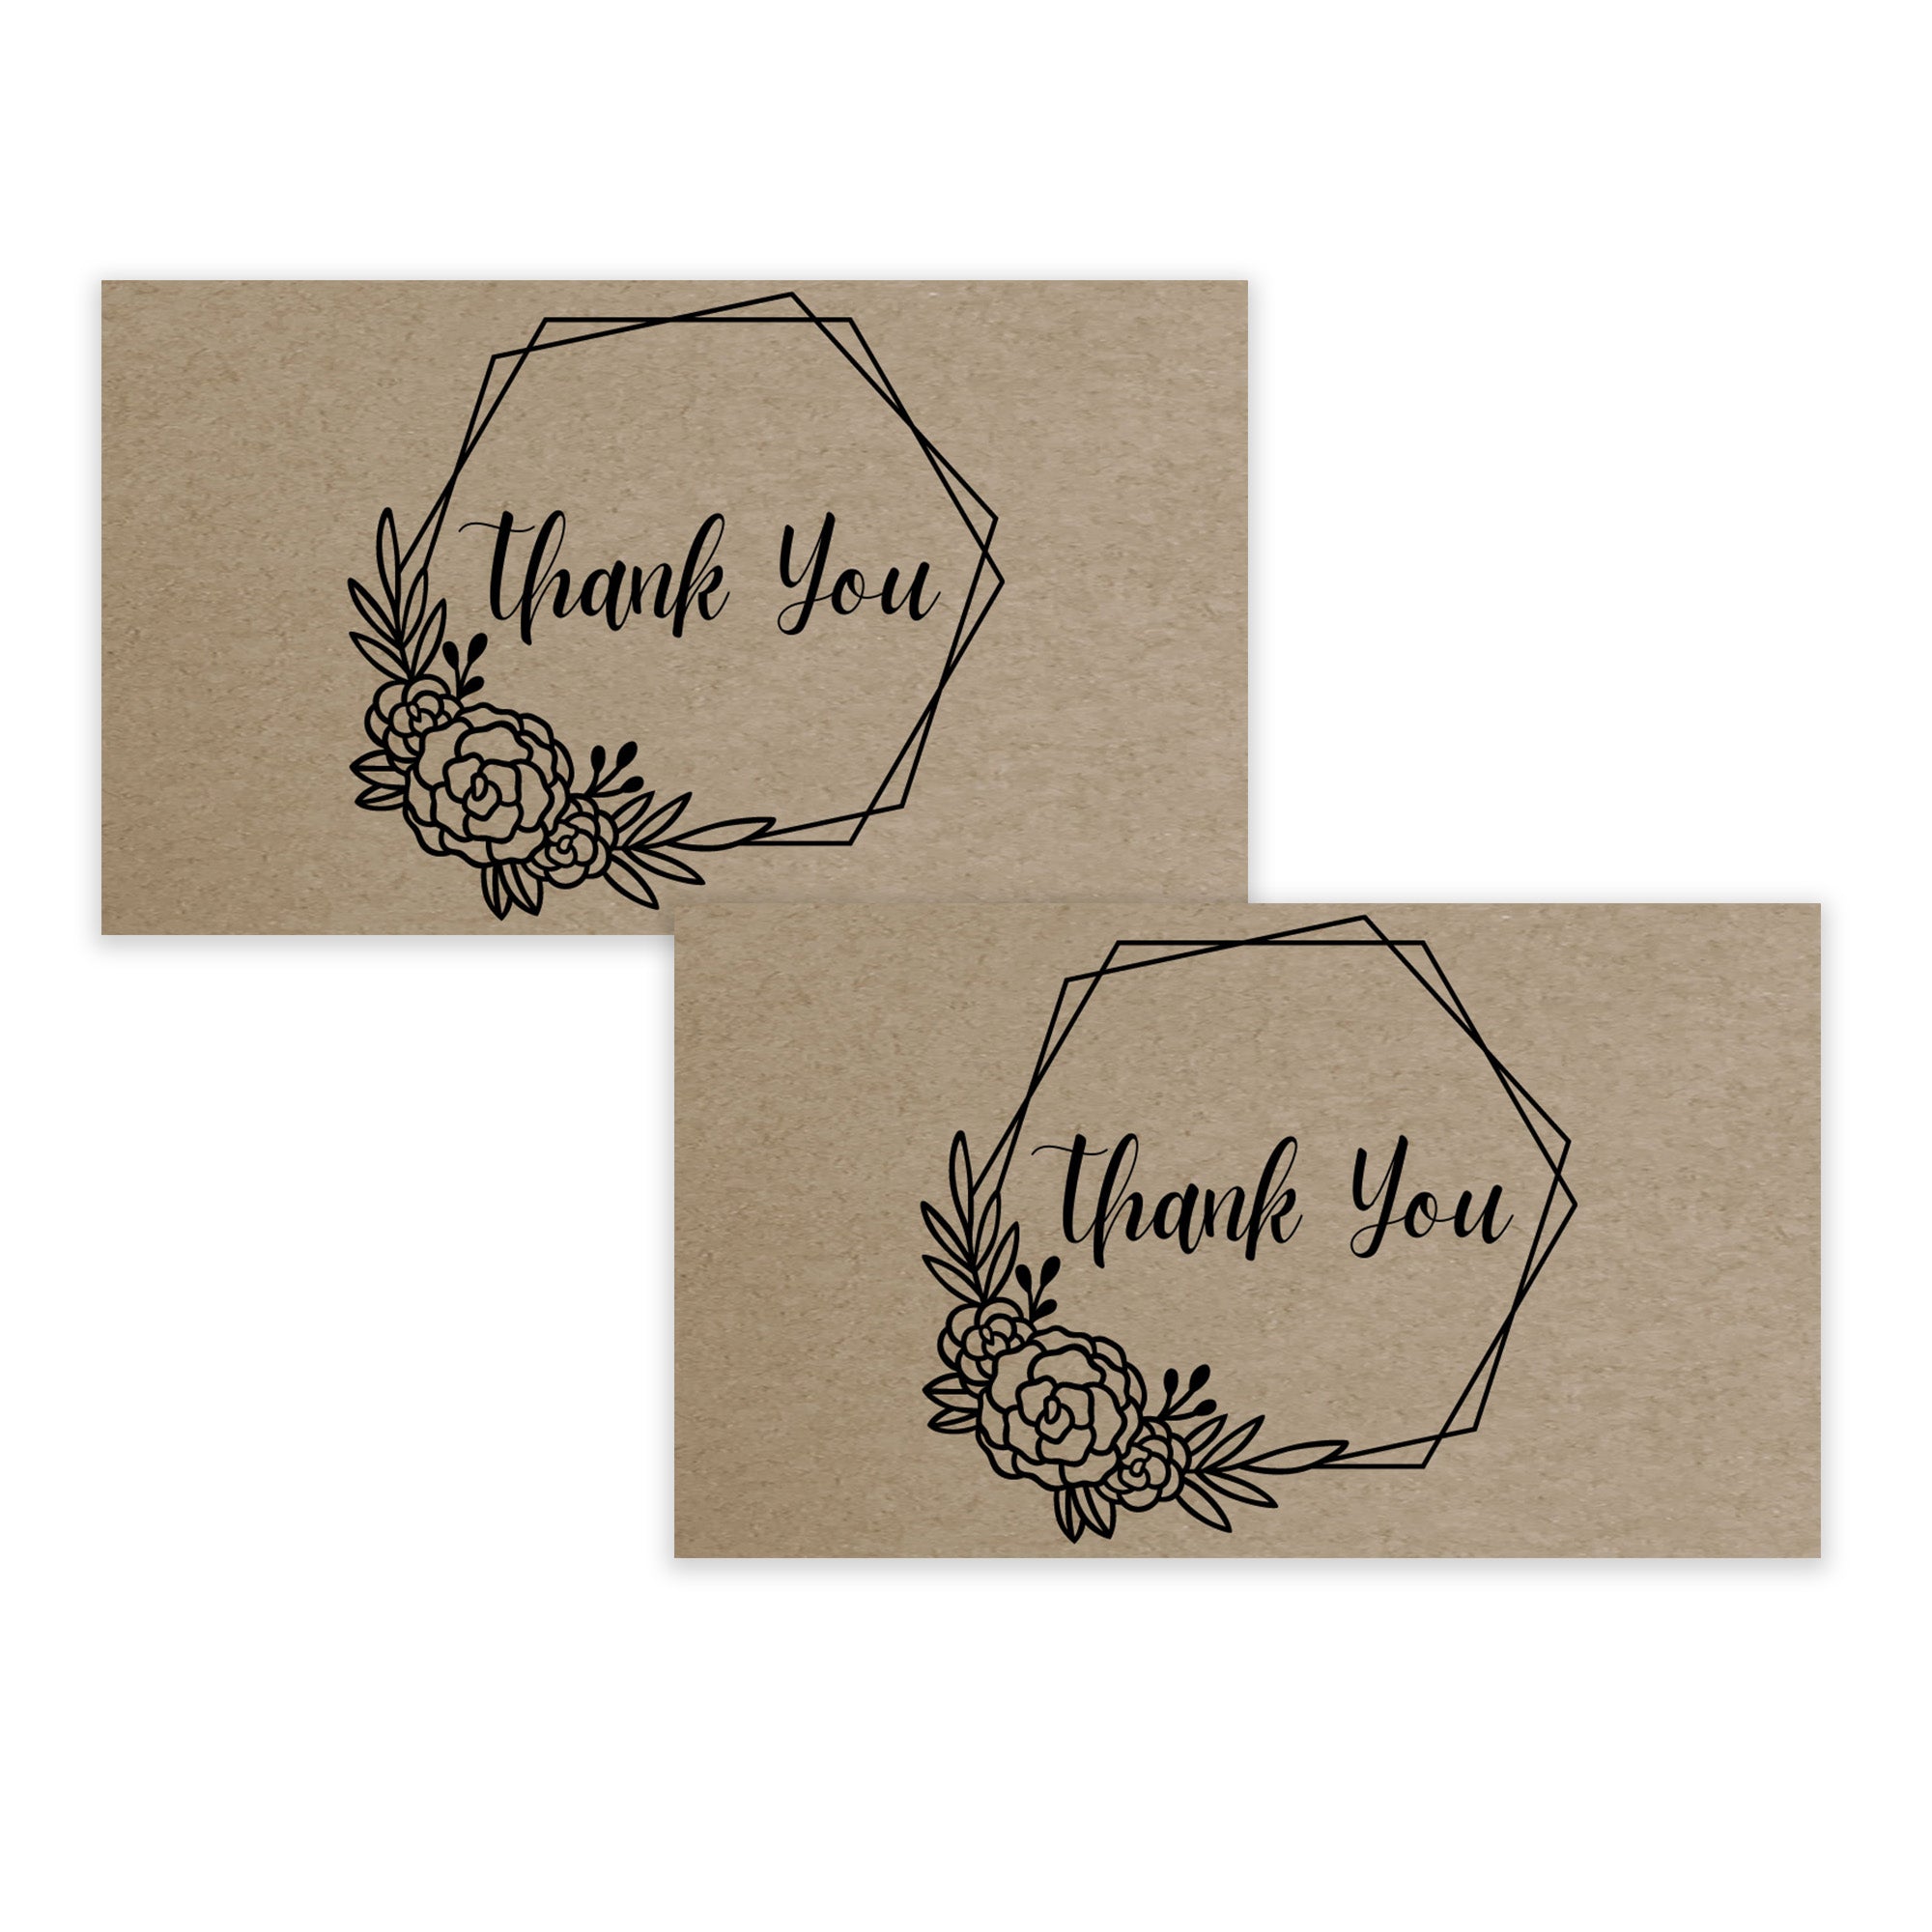 Thank you card design, Letterpress business cards, Small business cards